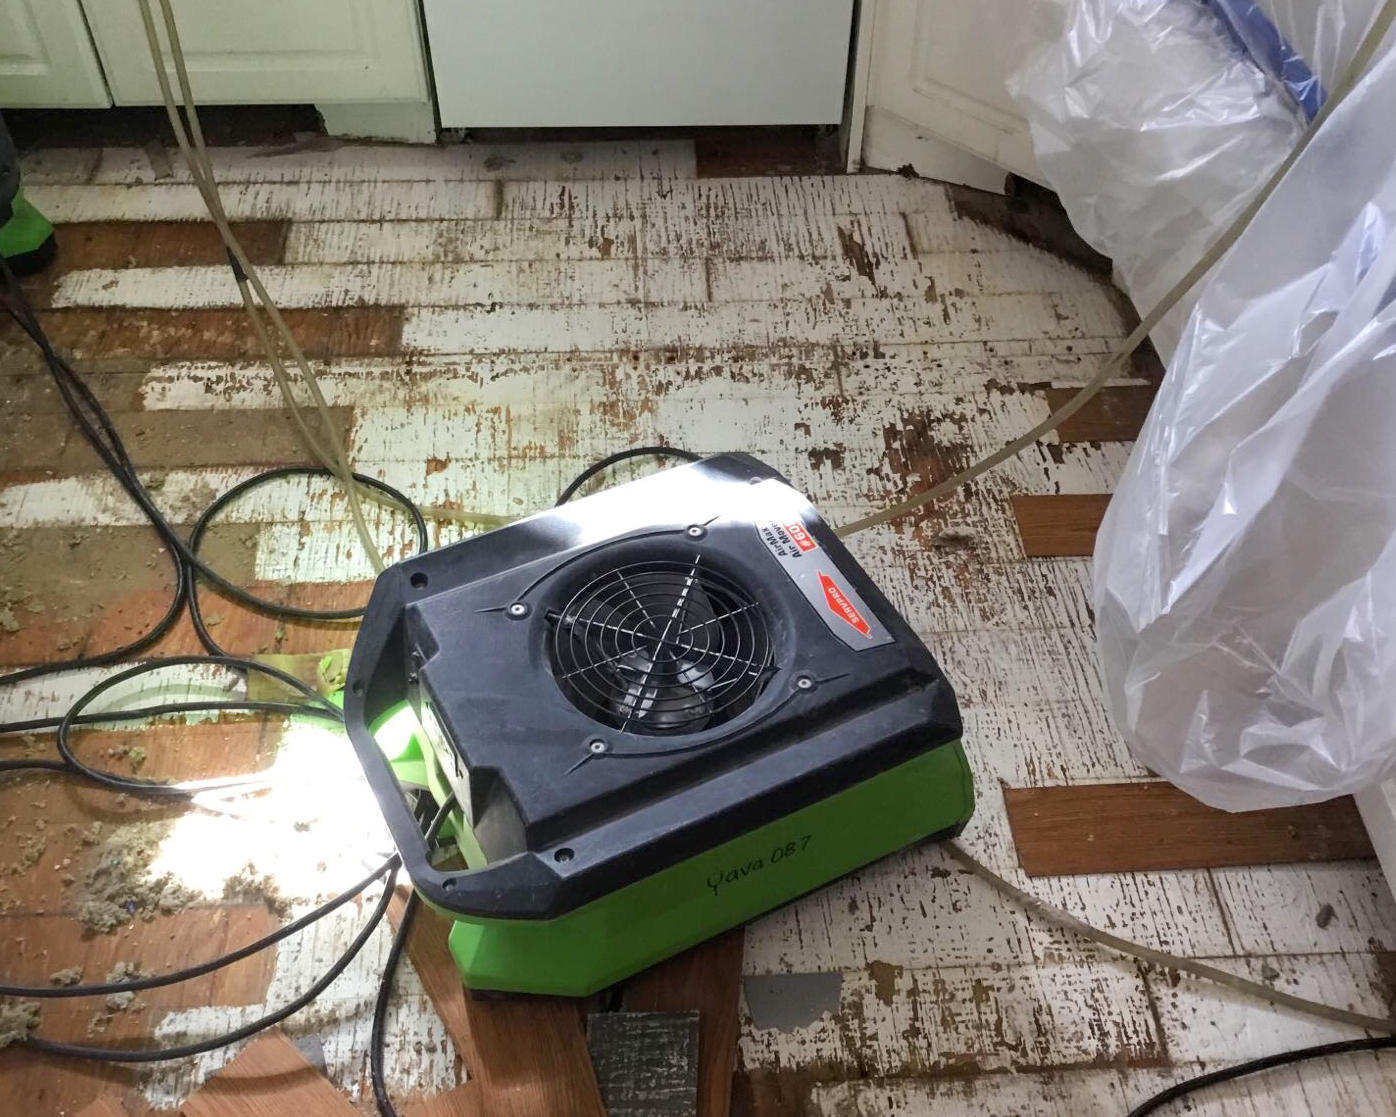 SERVPRO of Yavapai County has the best experienced team and equipment to properly restore your home or business to preloss conditions.